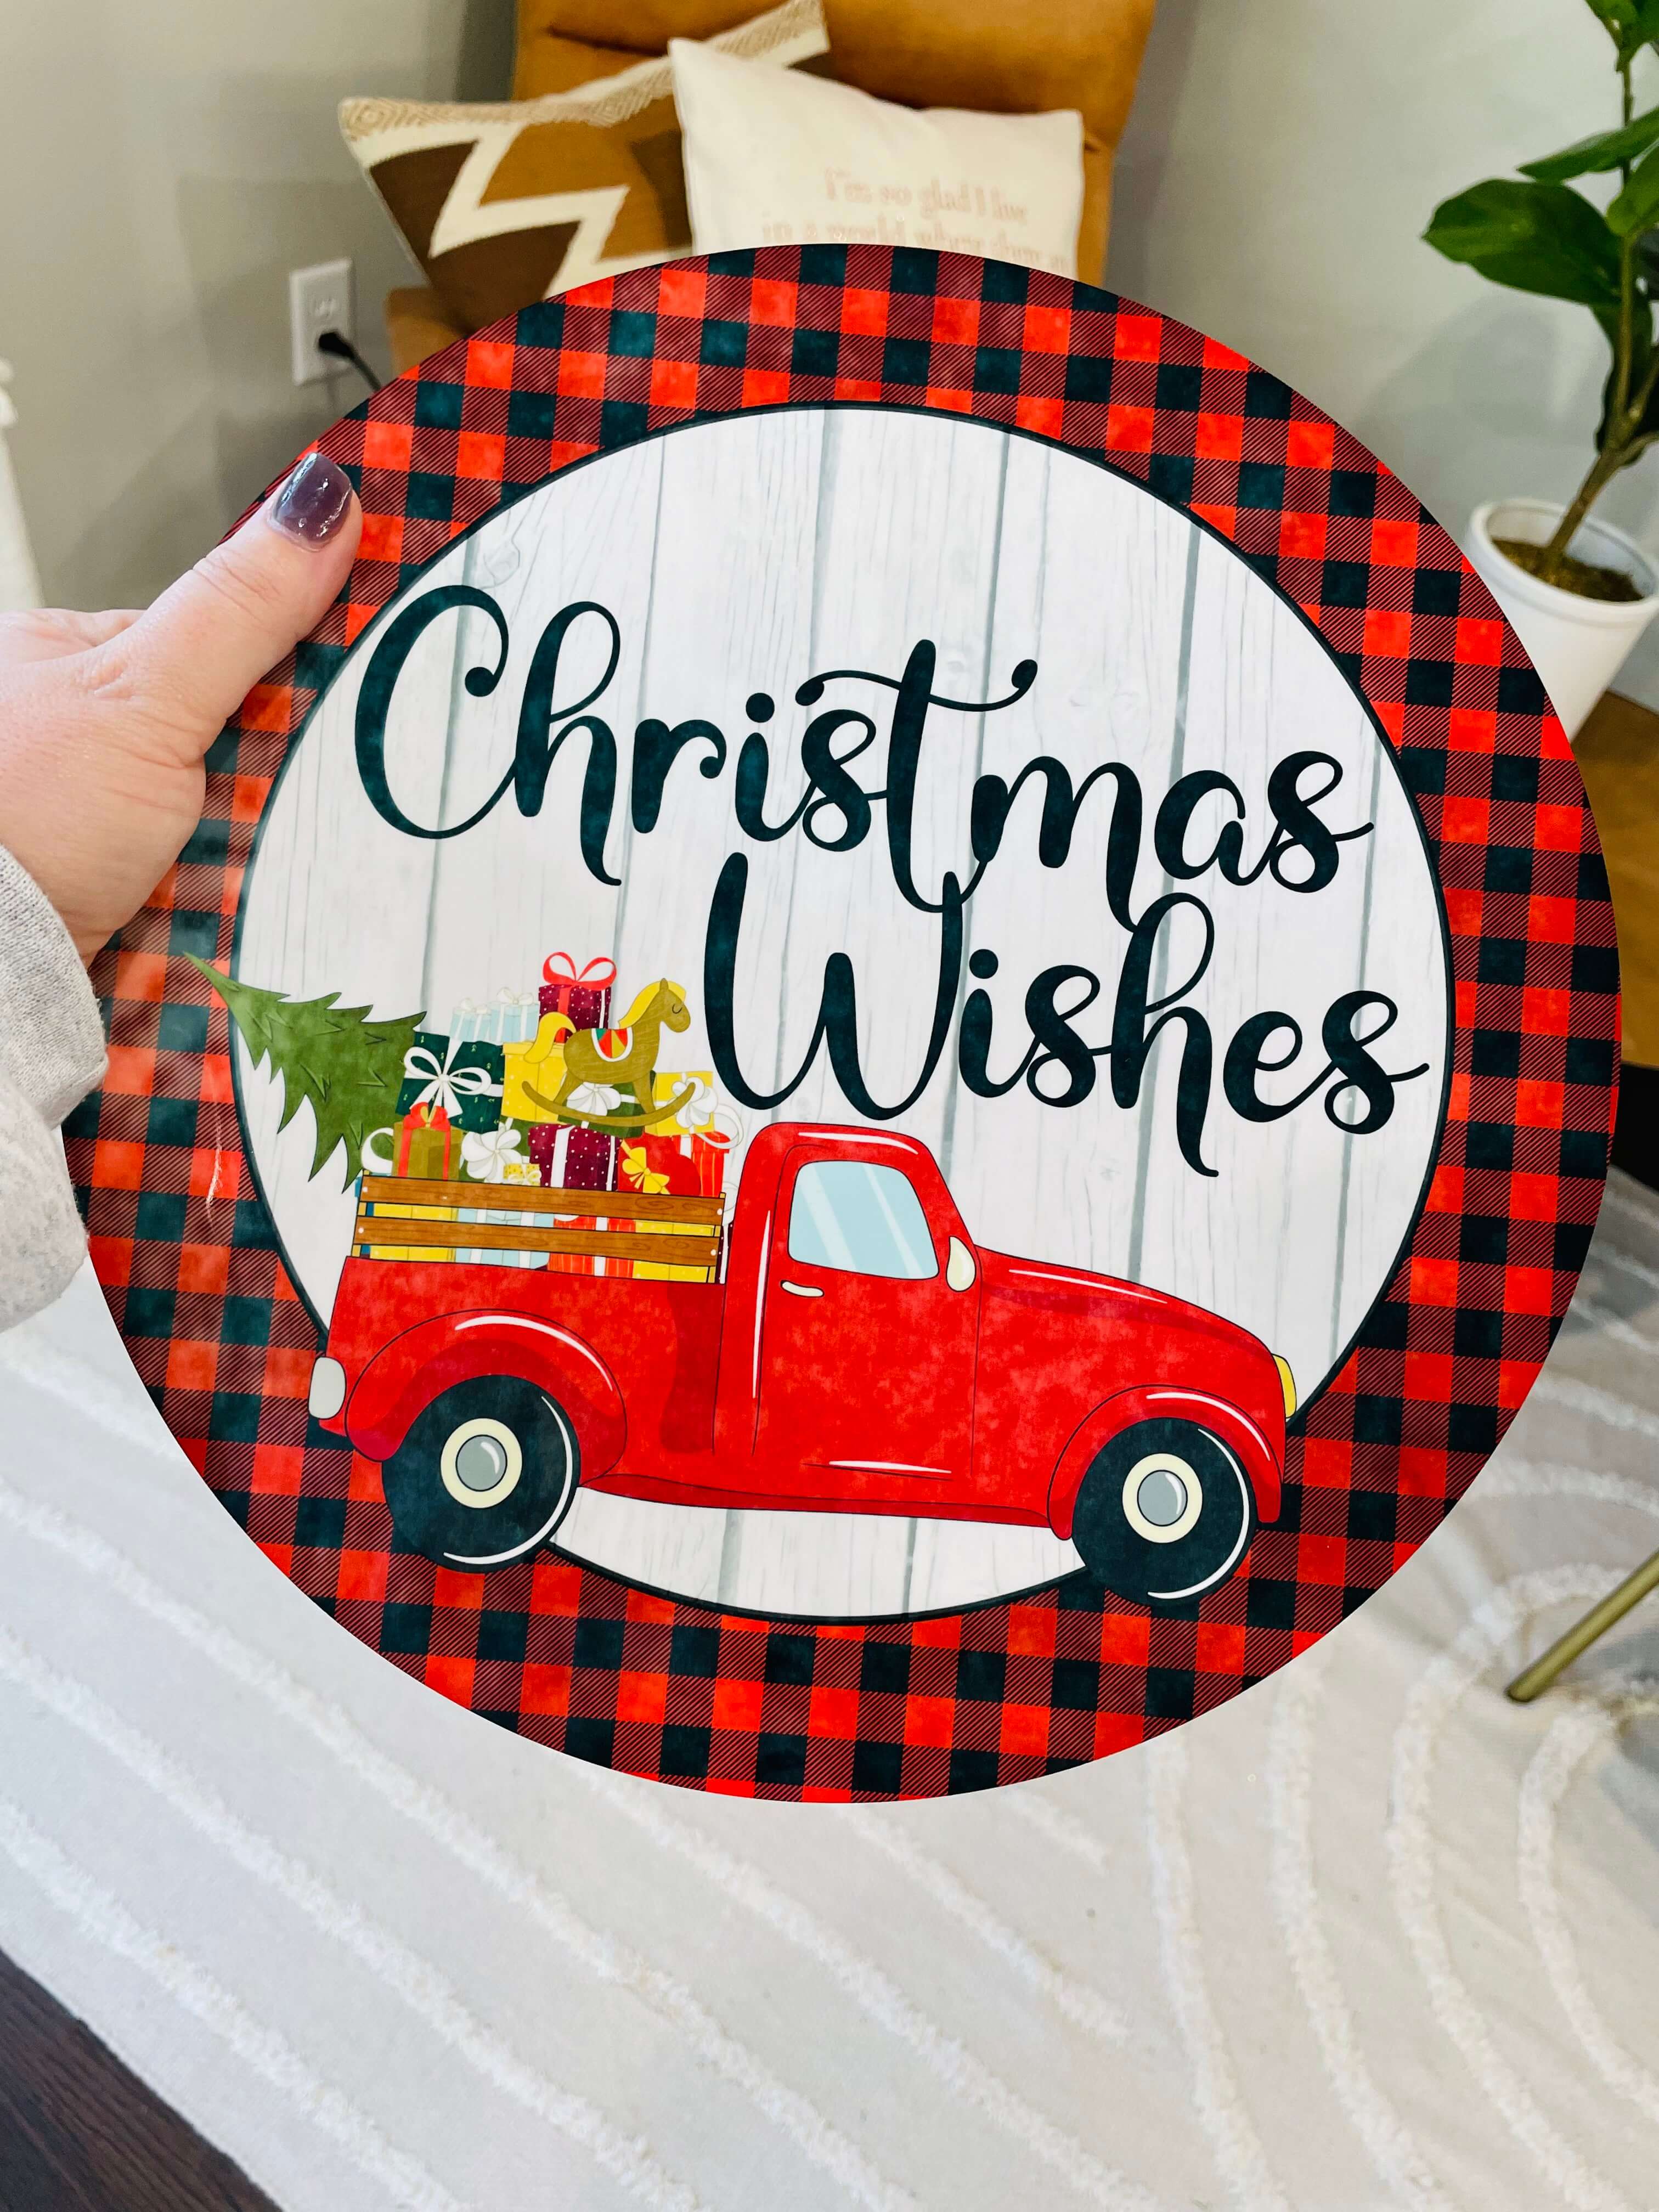 Home decor round personalized with a truck hauling a tree and "Christmas Wishes" above the truck